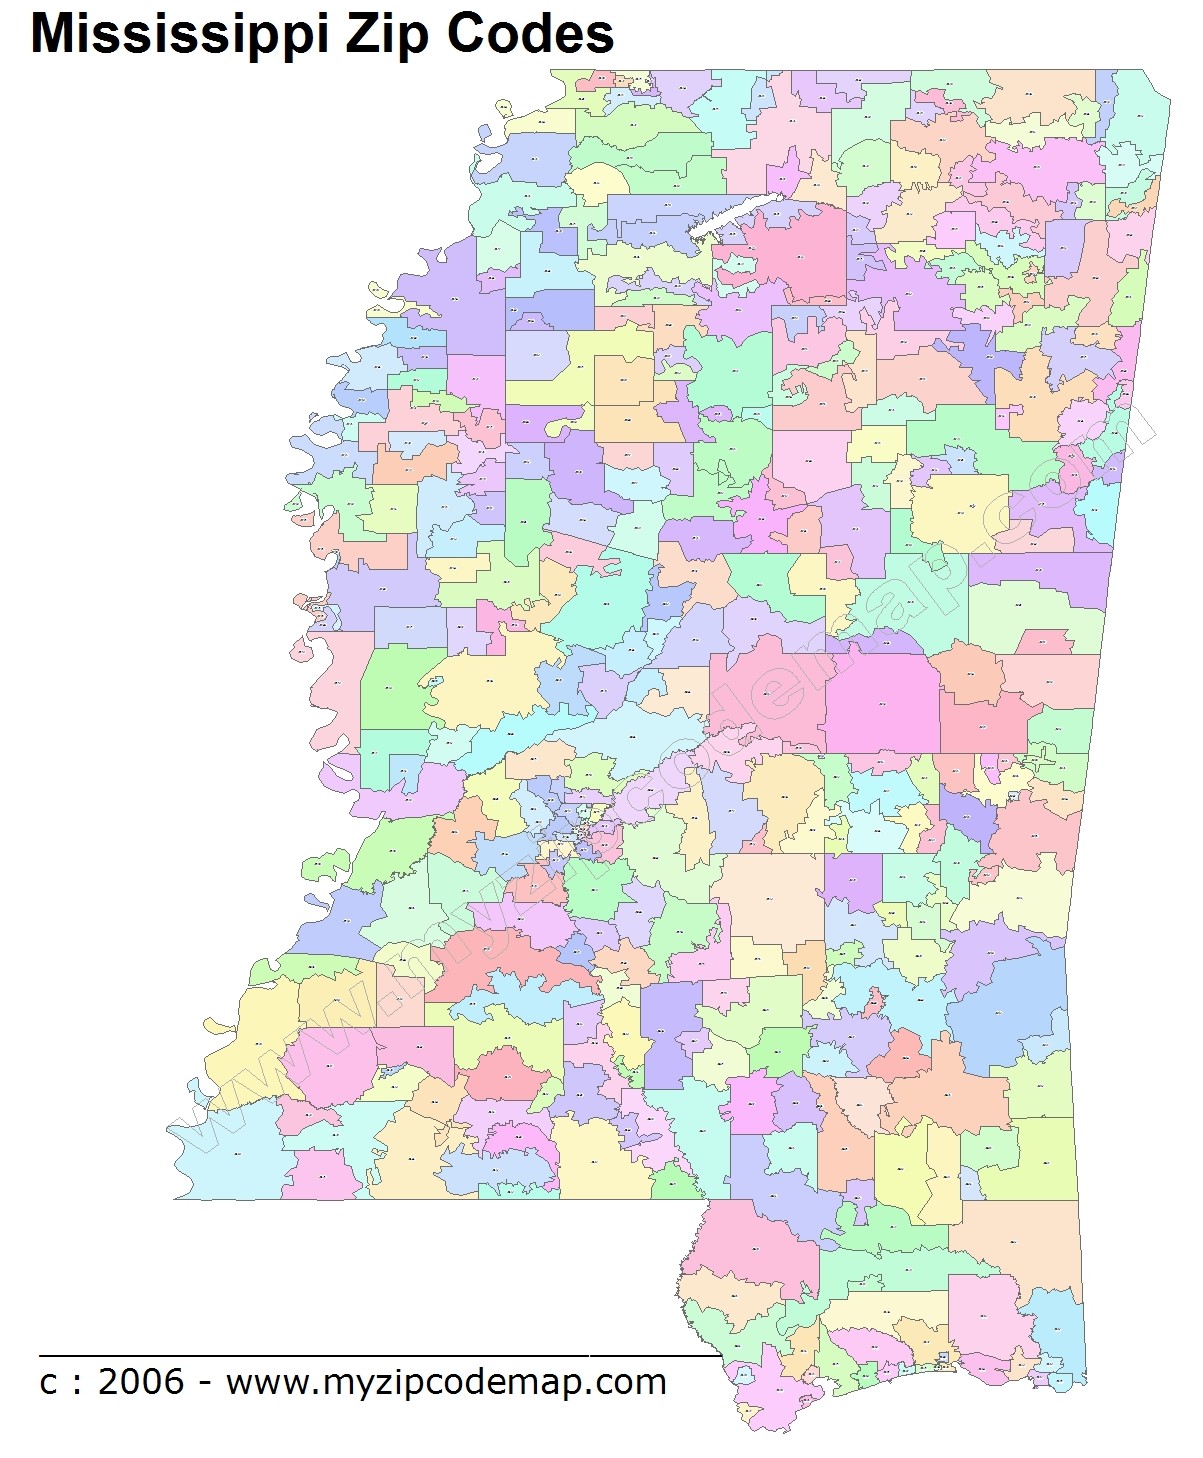 Mississippi (MS) Zip Code Map